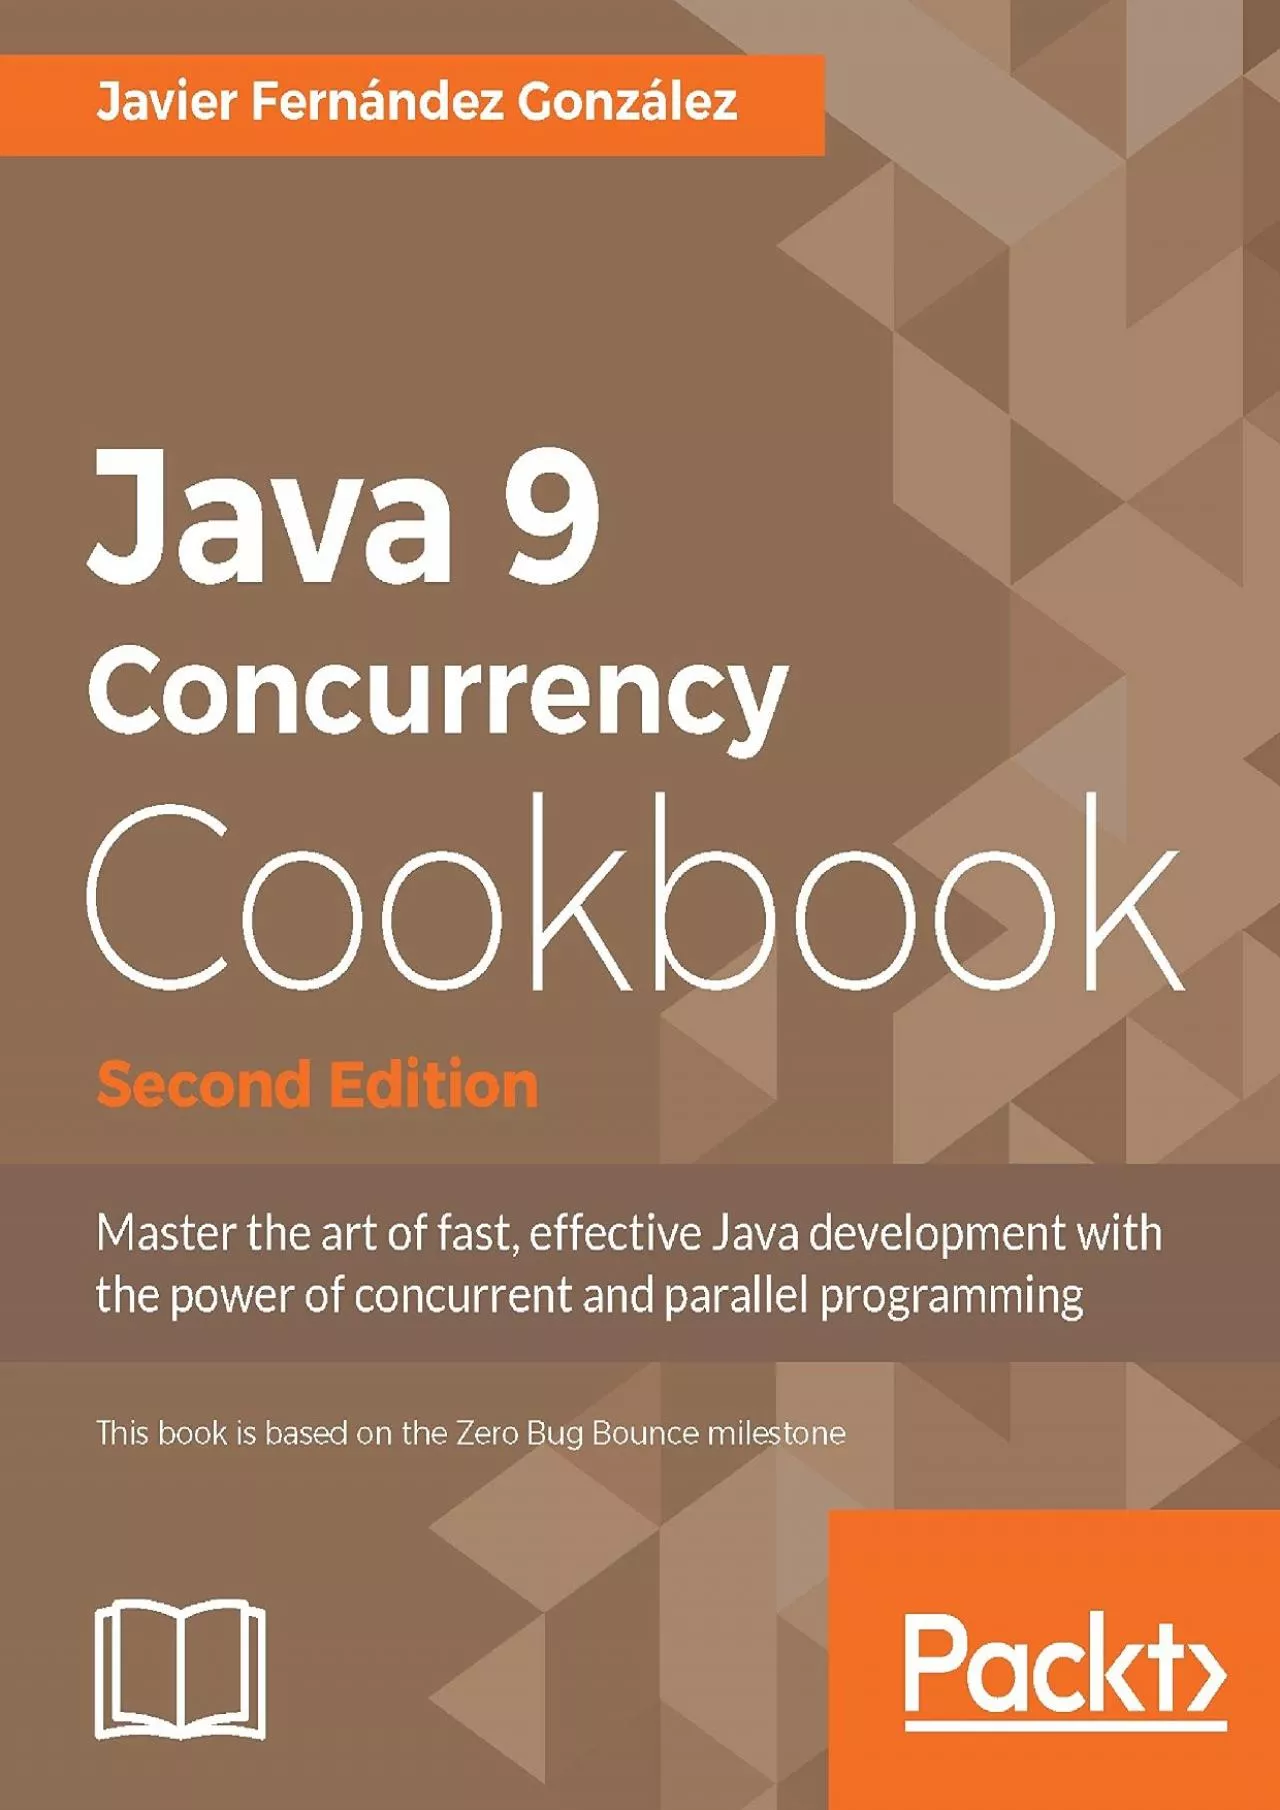 [DOWLOAD]-Java 9 Concurrency Cookbook - Second Edition